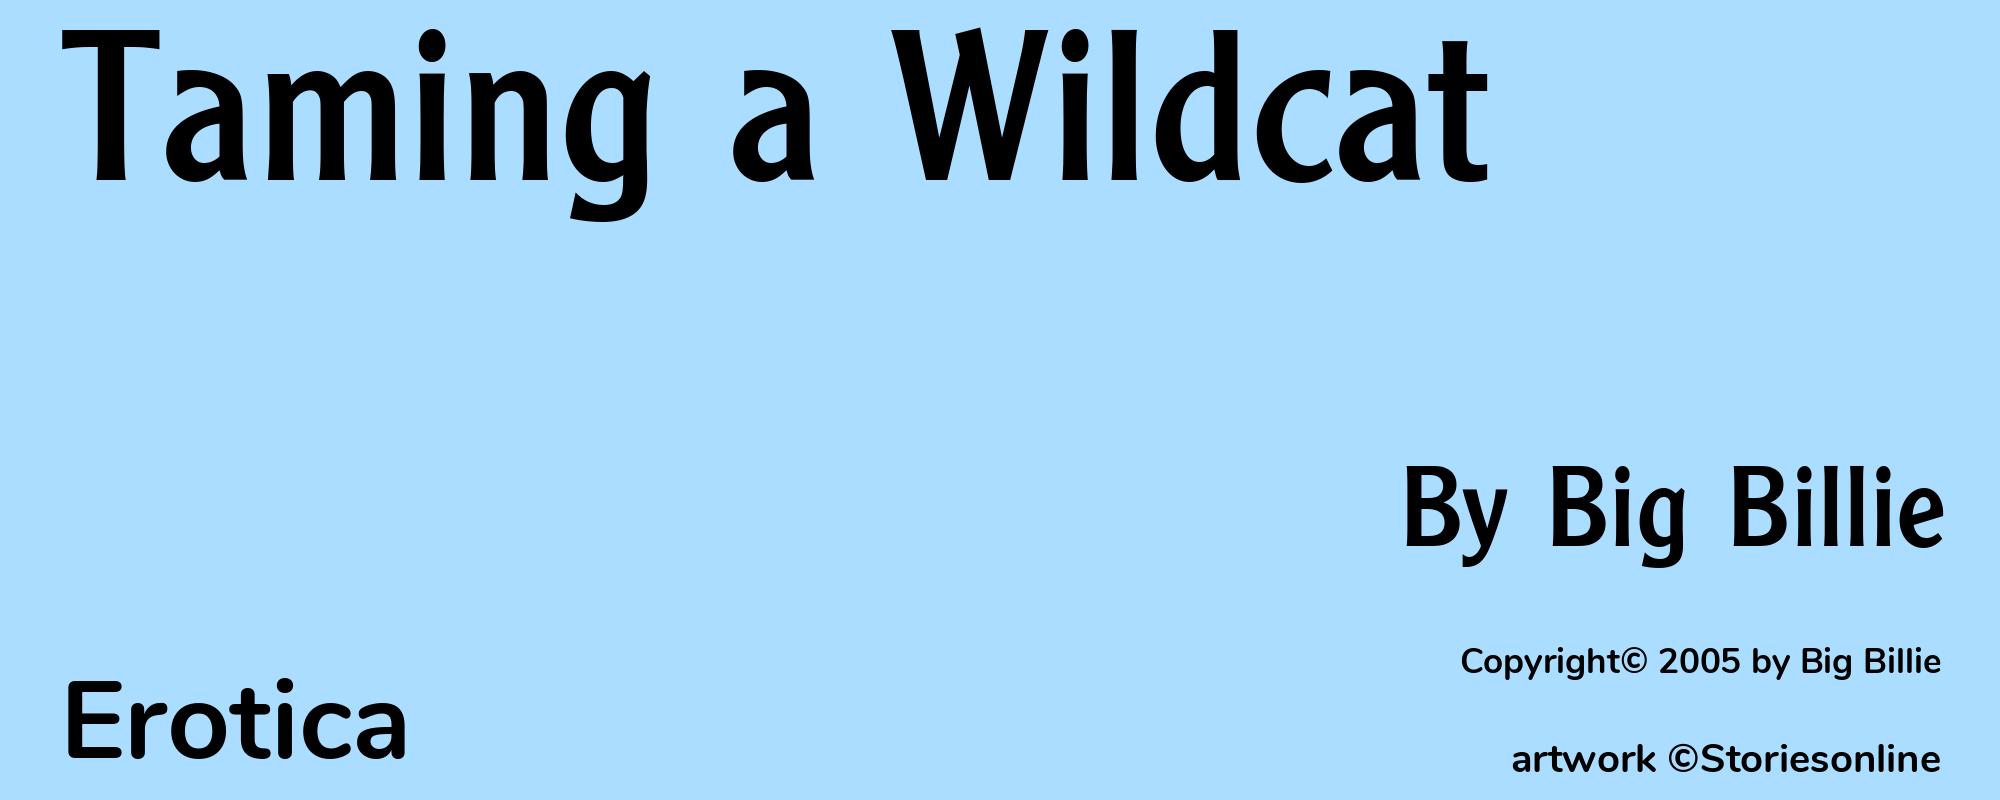 Taming a Wildcat - Cover